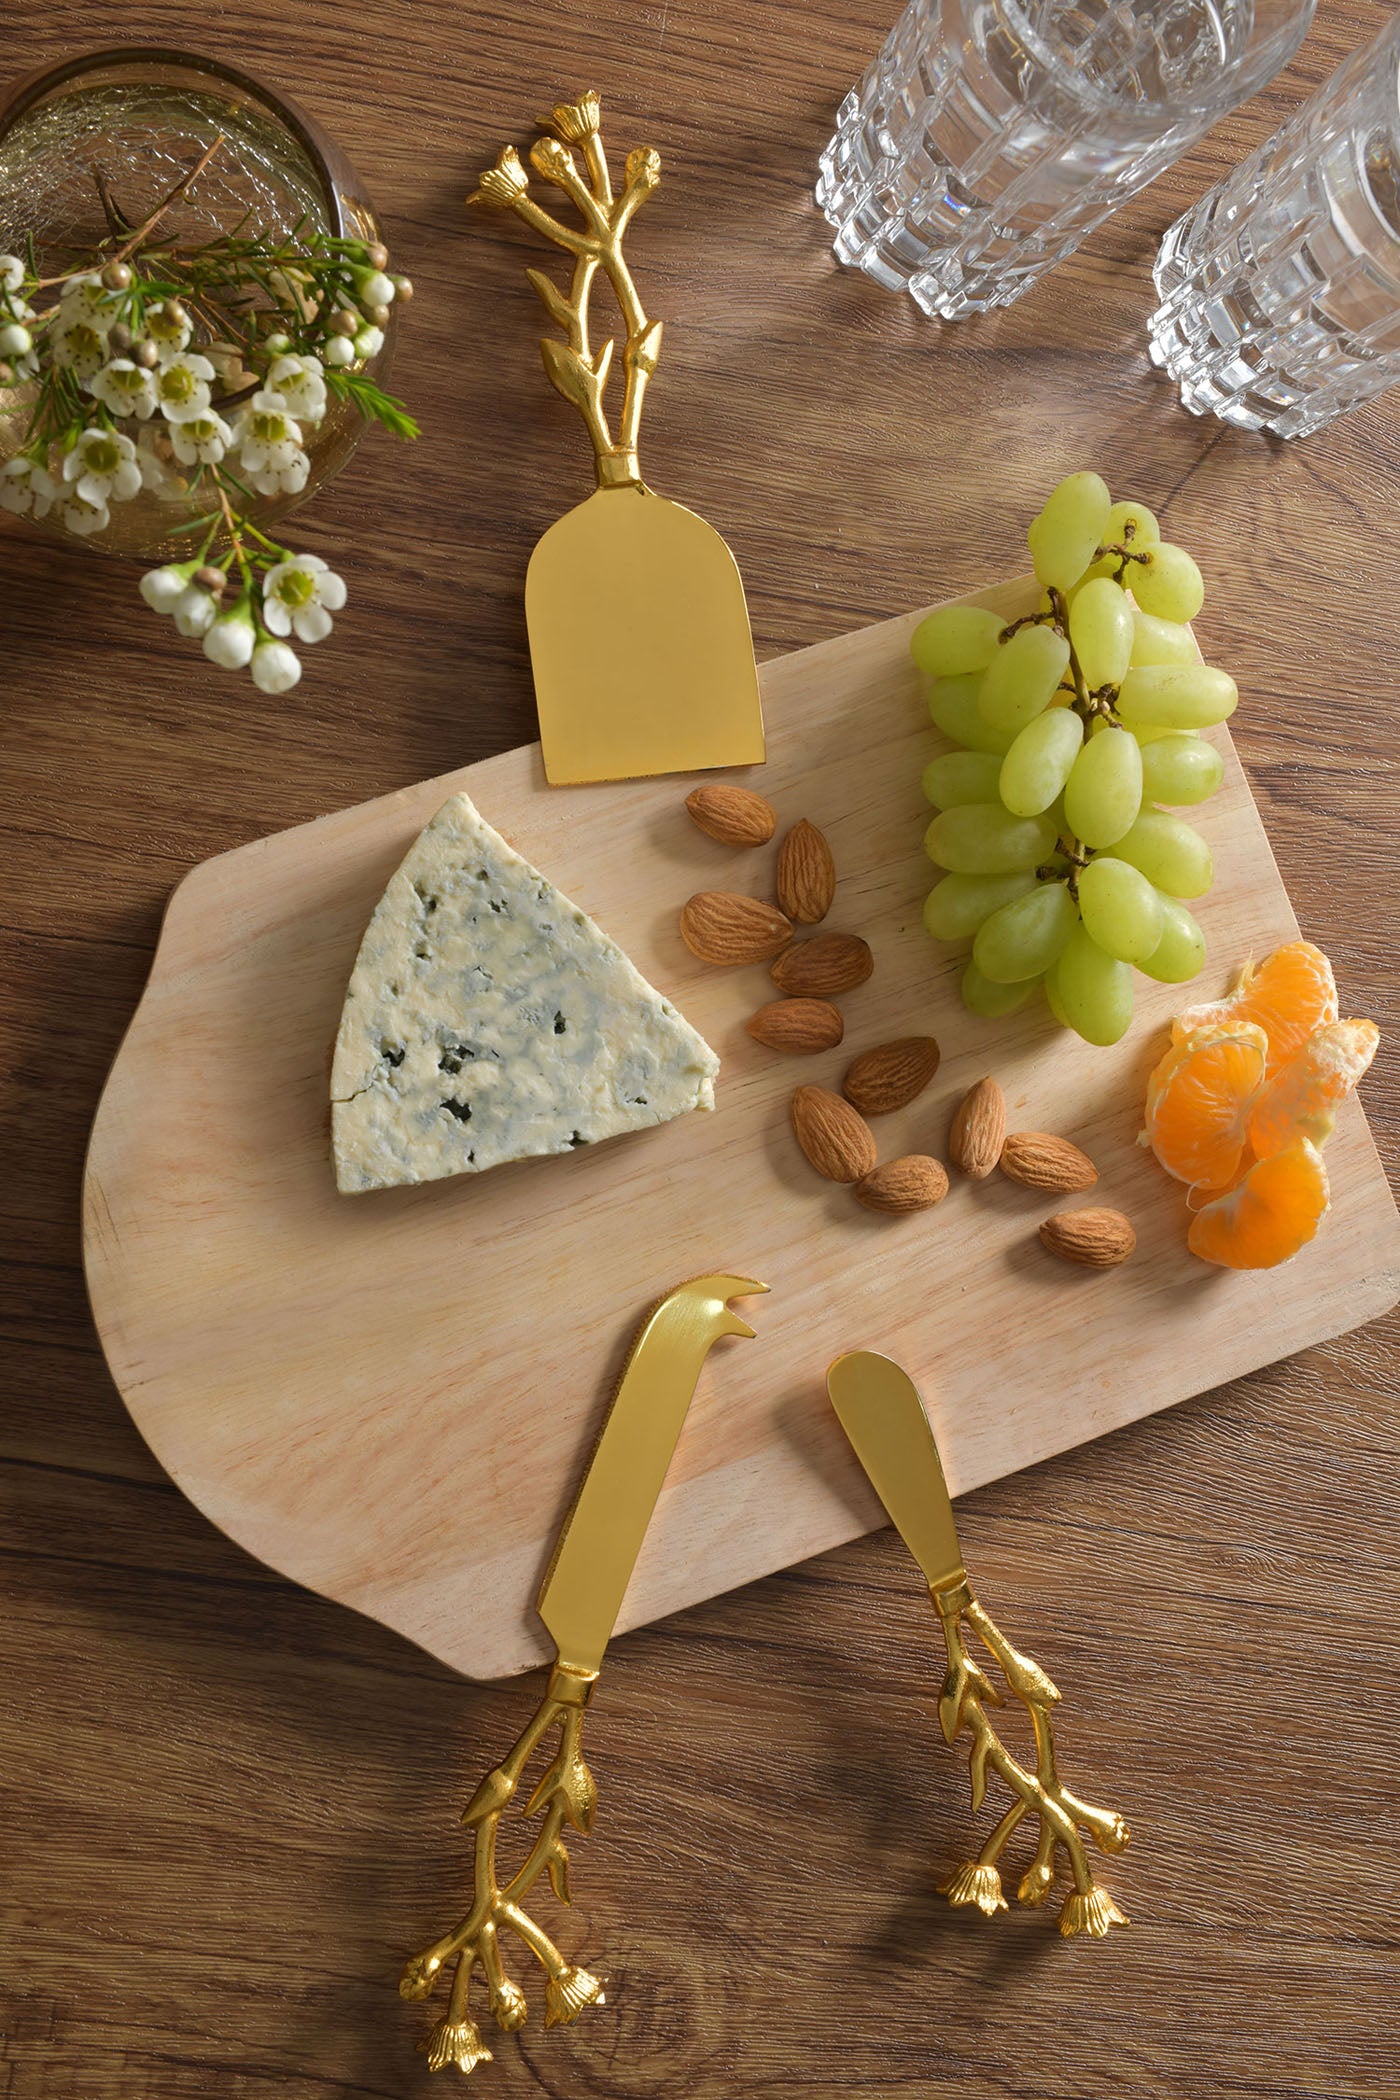 Cheese Knives (Set of 3)